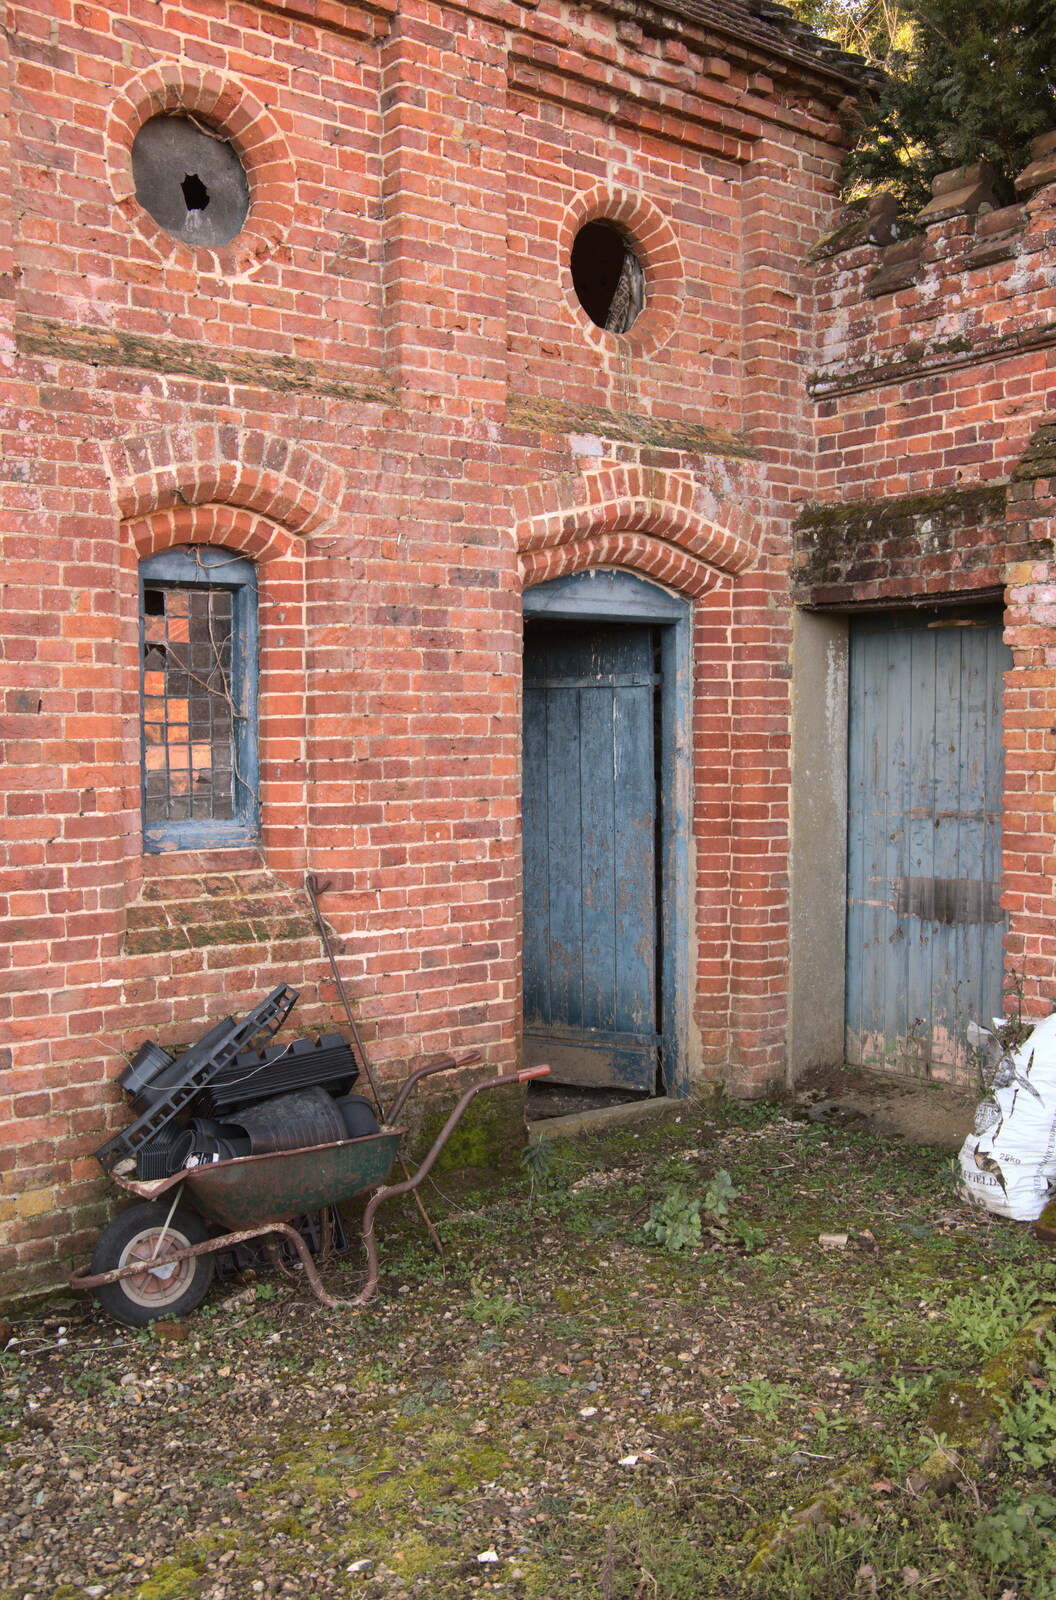 The gardener's shed from Snowdrops at Talconeston Hall, Tacolneston, Norfolk - 7th February 2020